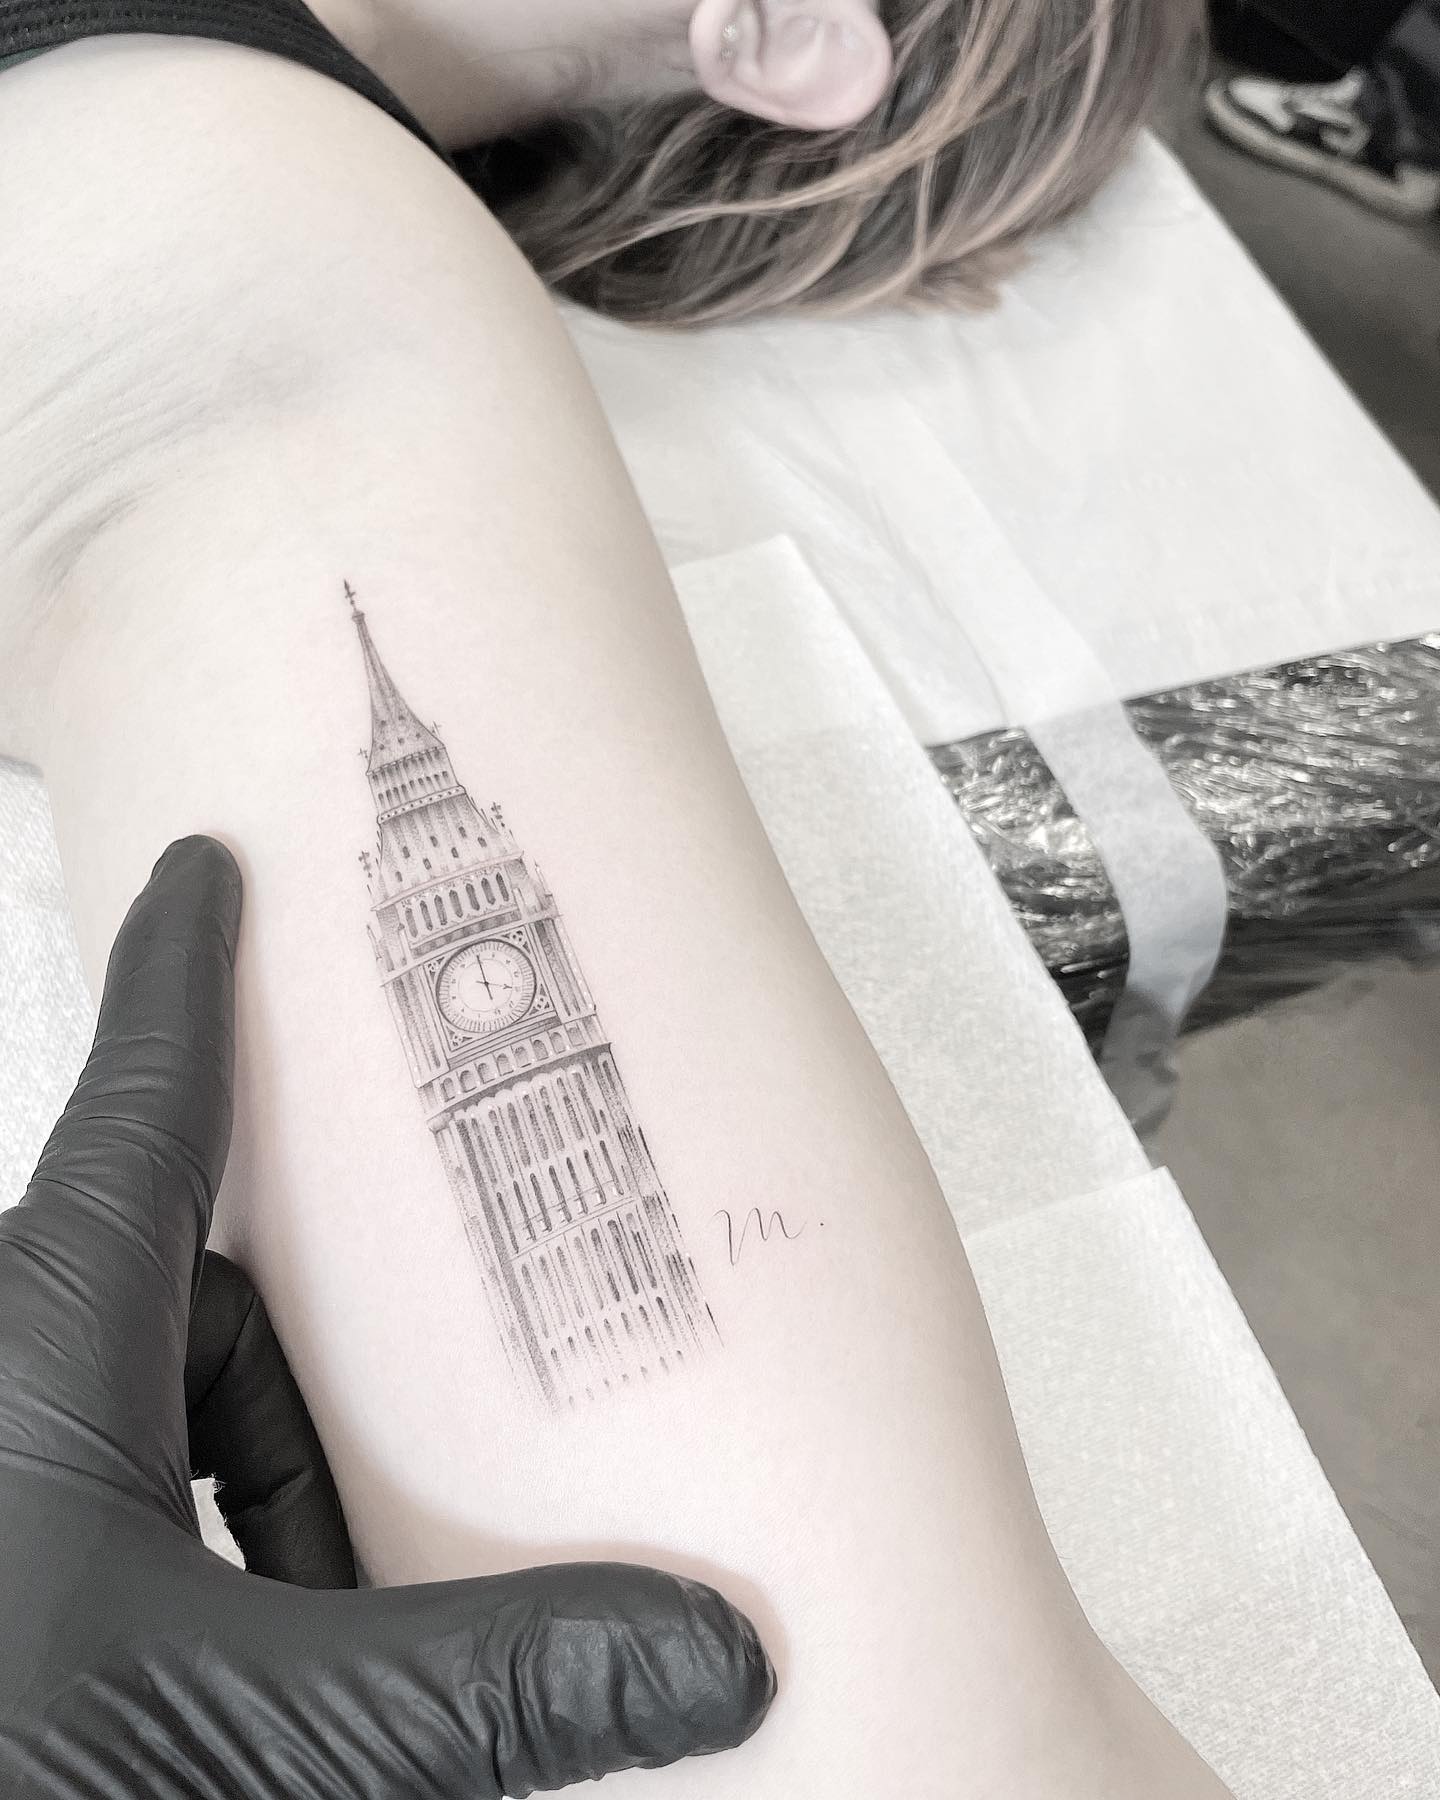 Big Ben is one of the most iconic symbols of United Kingdom. The design of it is perfect, so why not getting a tattoo of it?